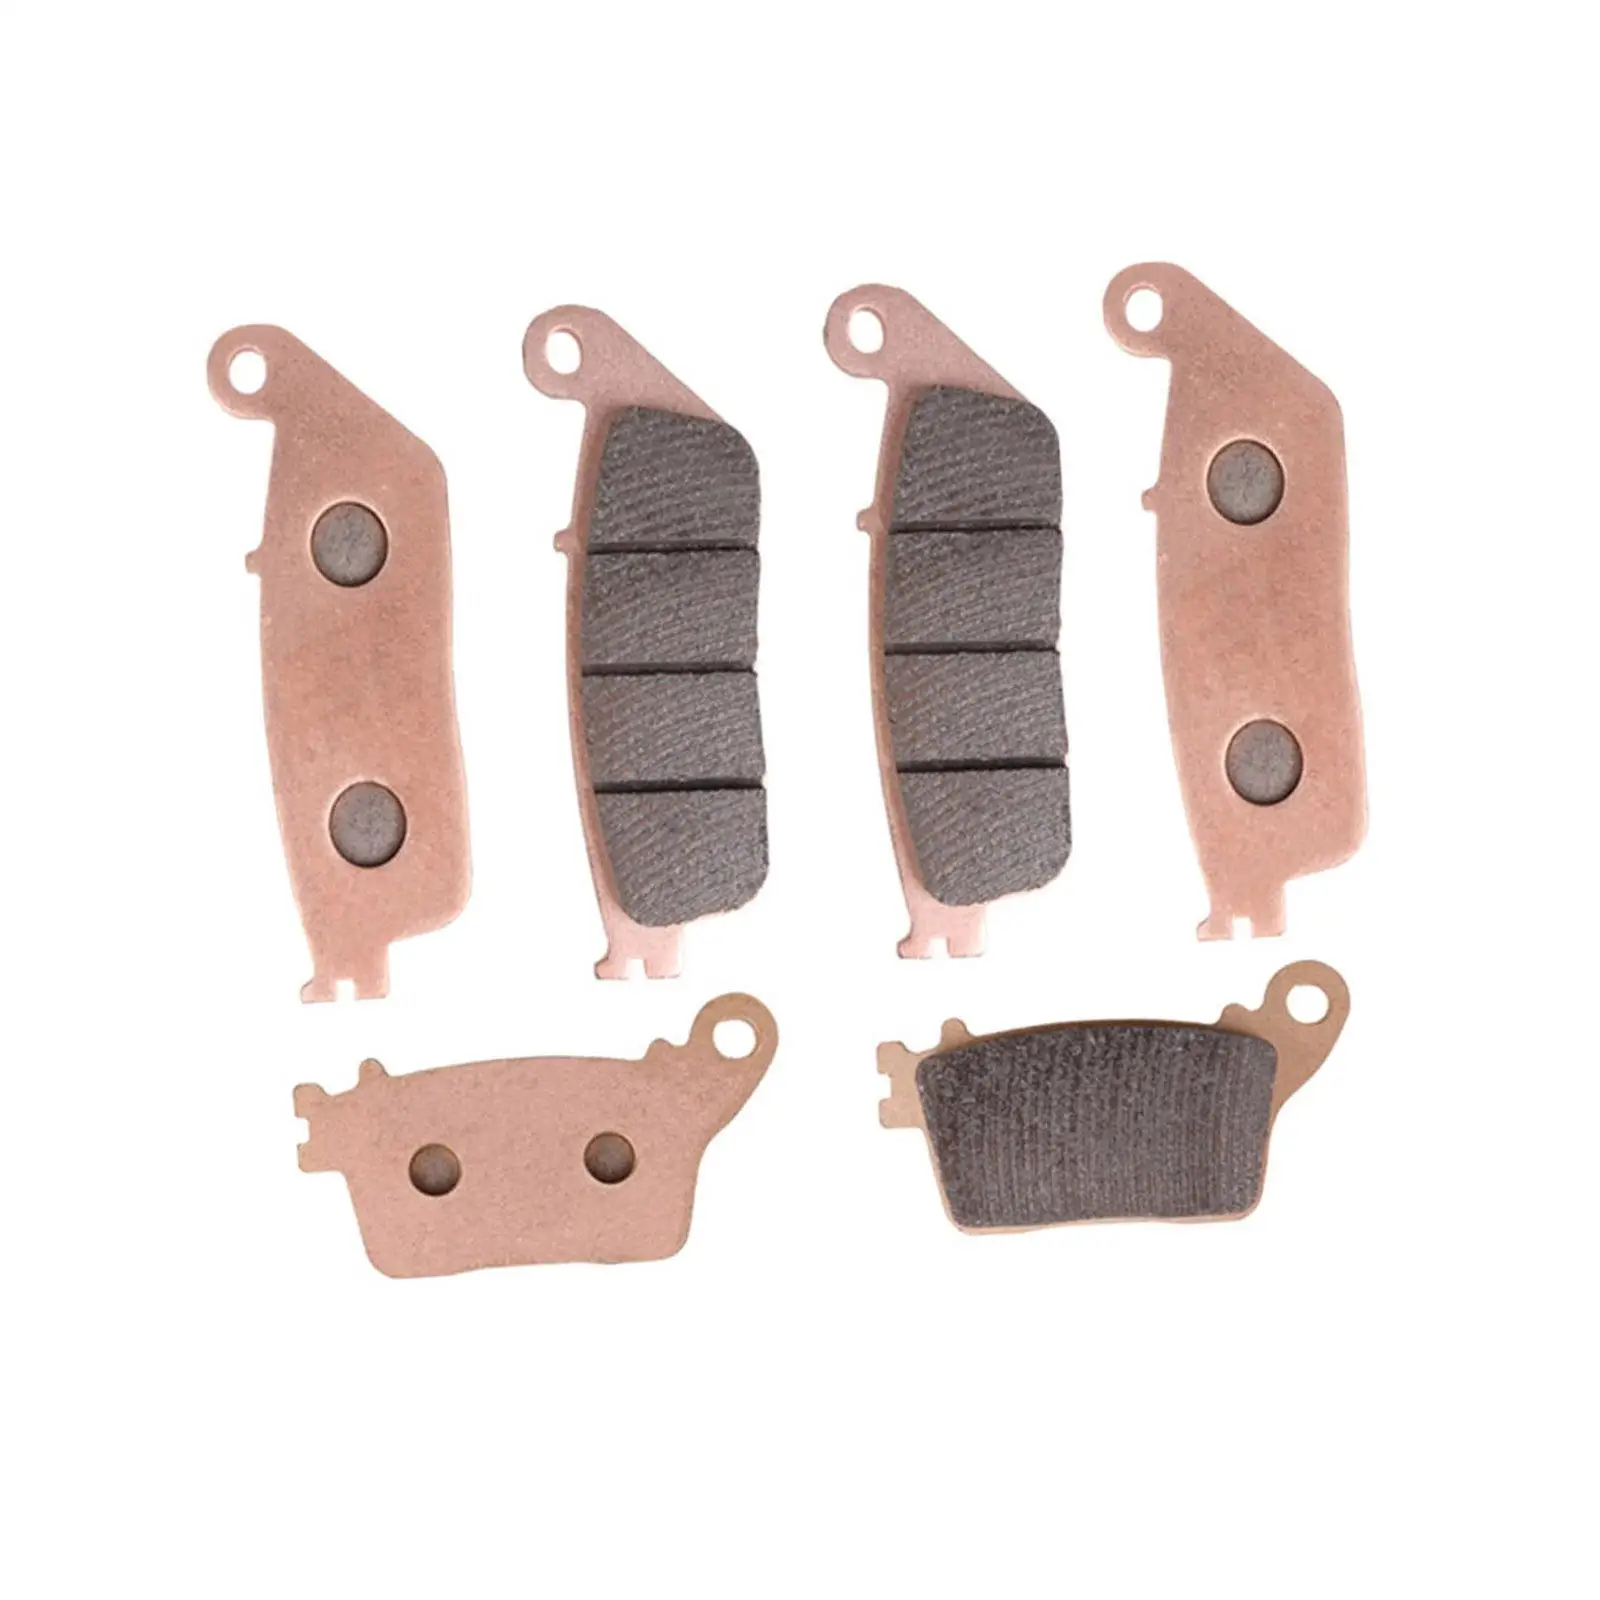 6 Pieces Front and Rear Brake Pads Set Brake Pads performance of Honda